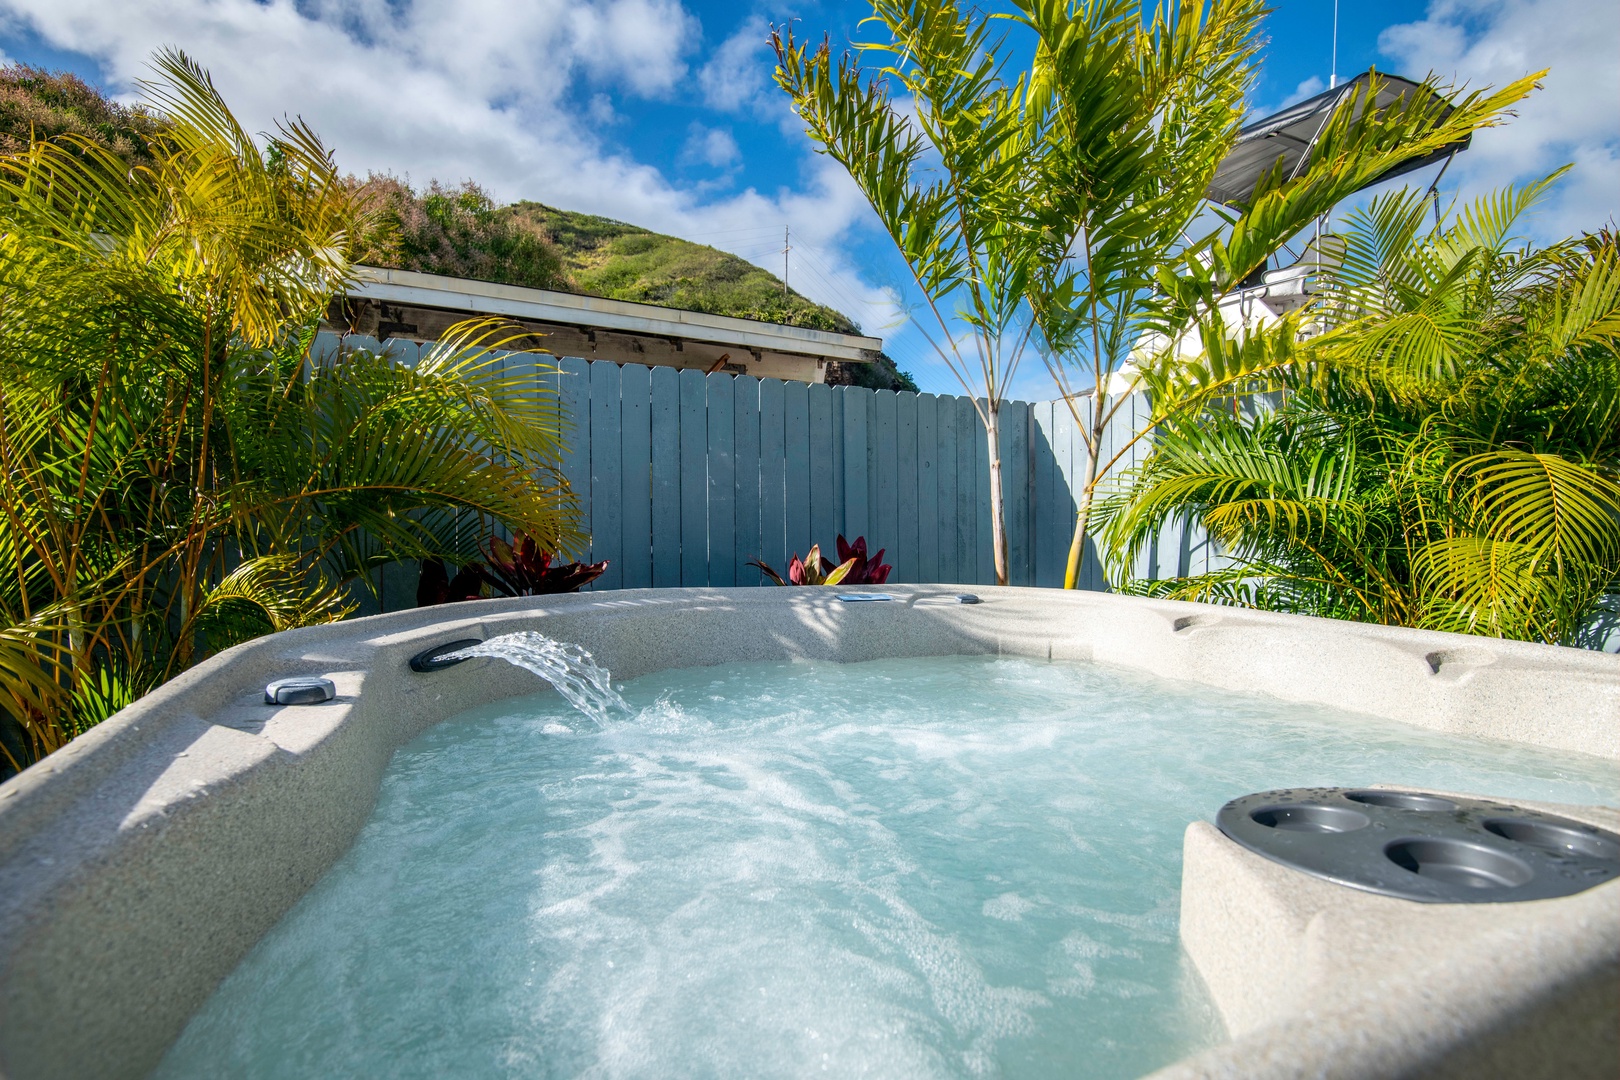 Honolulu Vacation Rentals, Holoholo Hale - Rest and relax in the private hot tub in the back yard, brand new to the home!